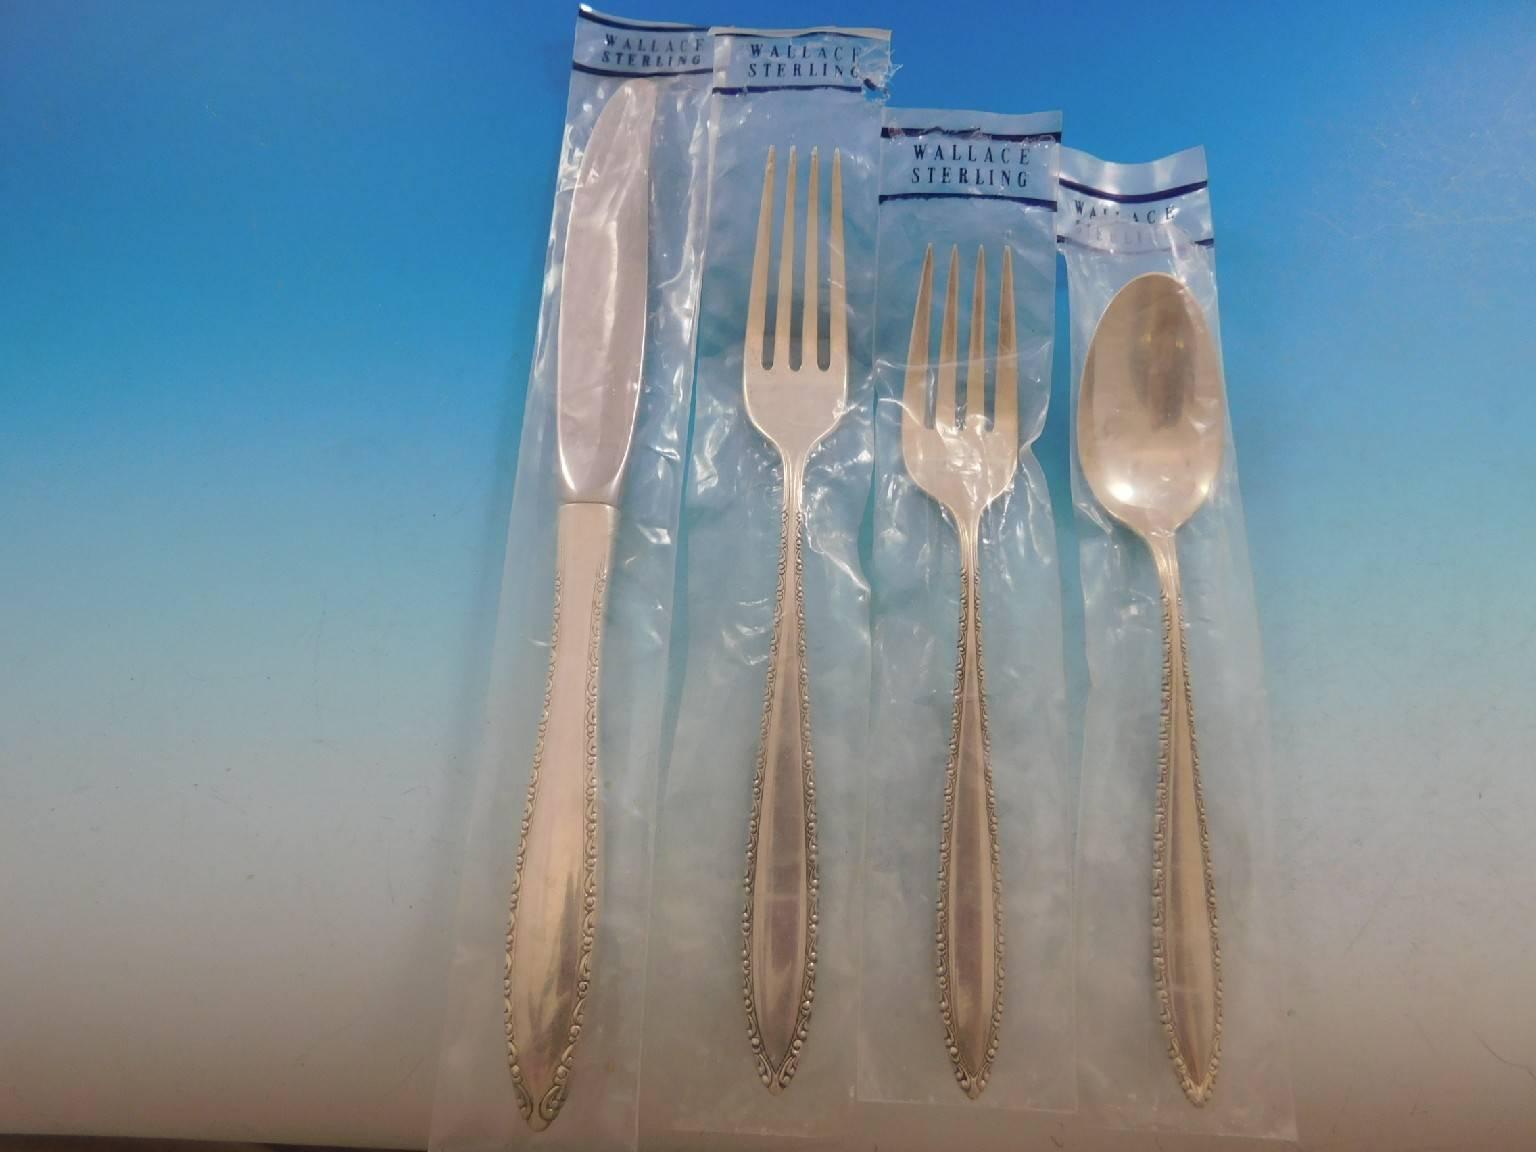 New, unused Michele by Wallace sterling silver flatware set of 33 pieces. This set includes:

Eight knives, 9